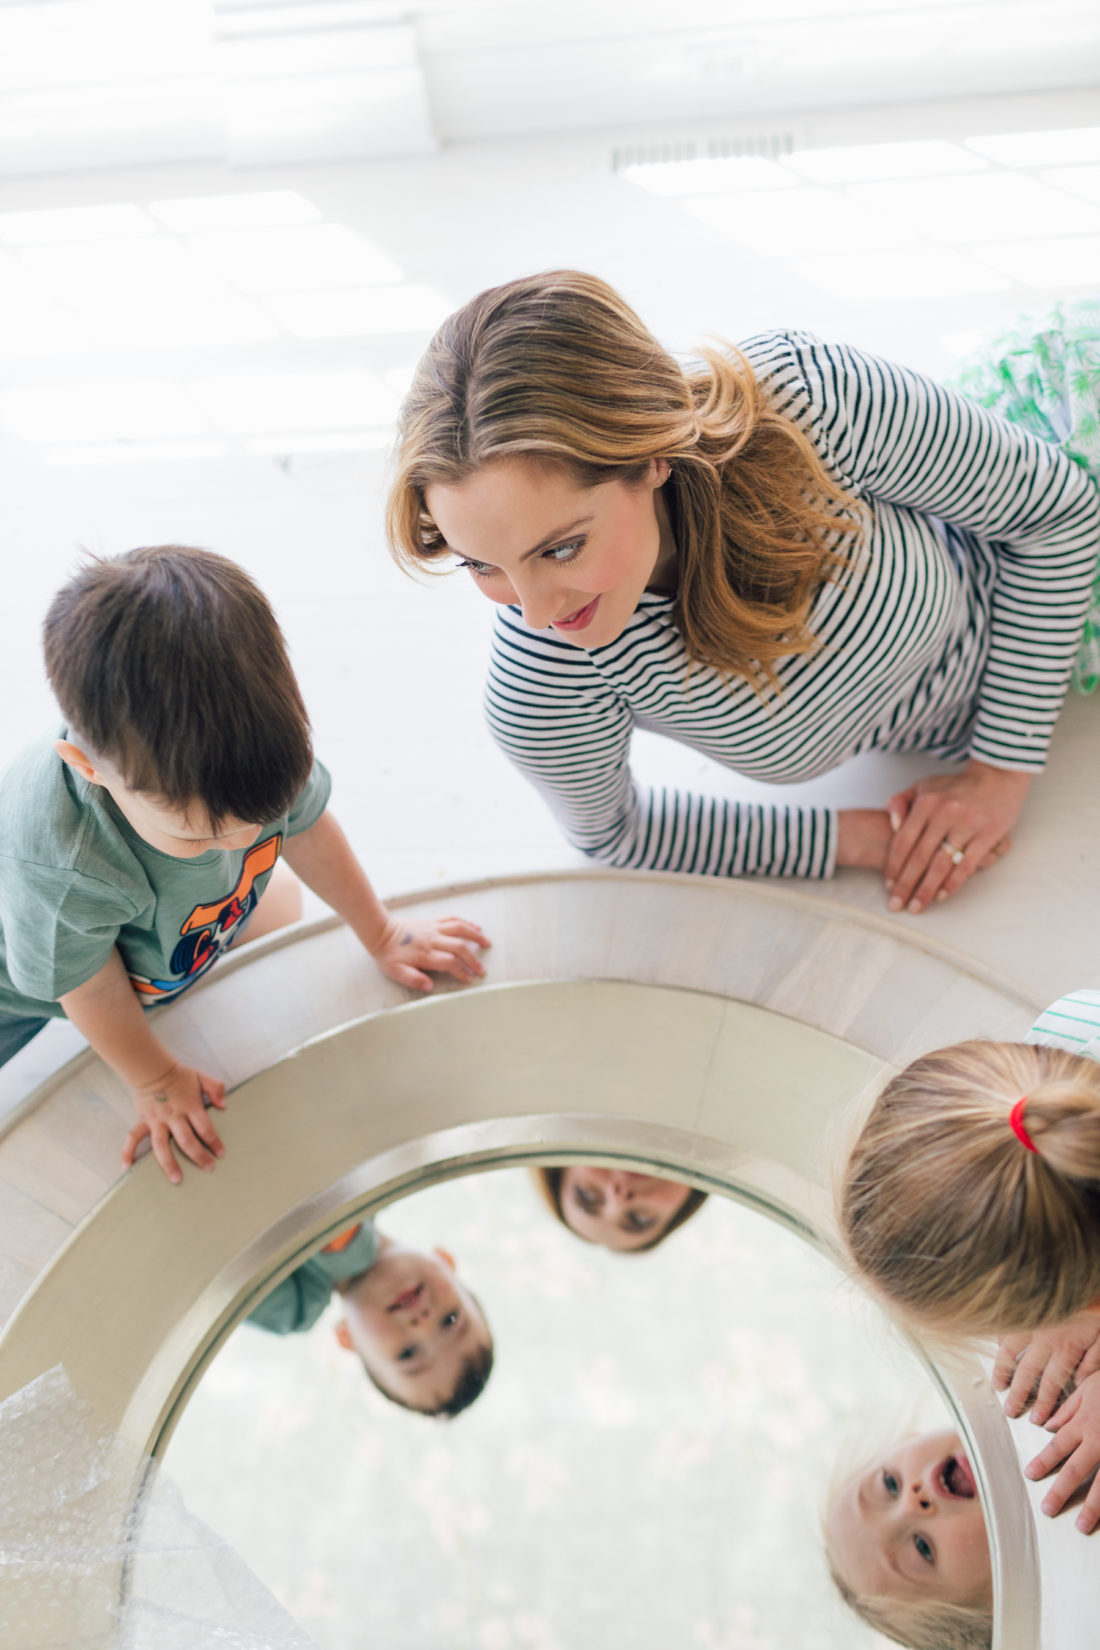 Eva Amurri Martino sits with her kids Marlowe and Major in their new Connecticut home